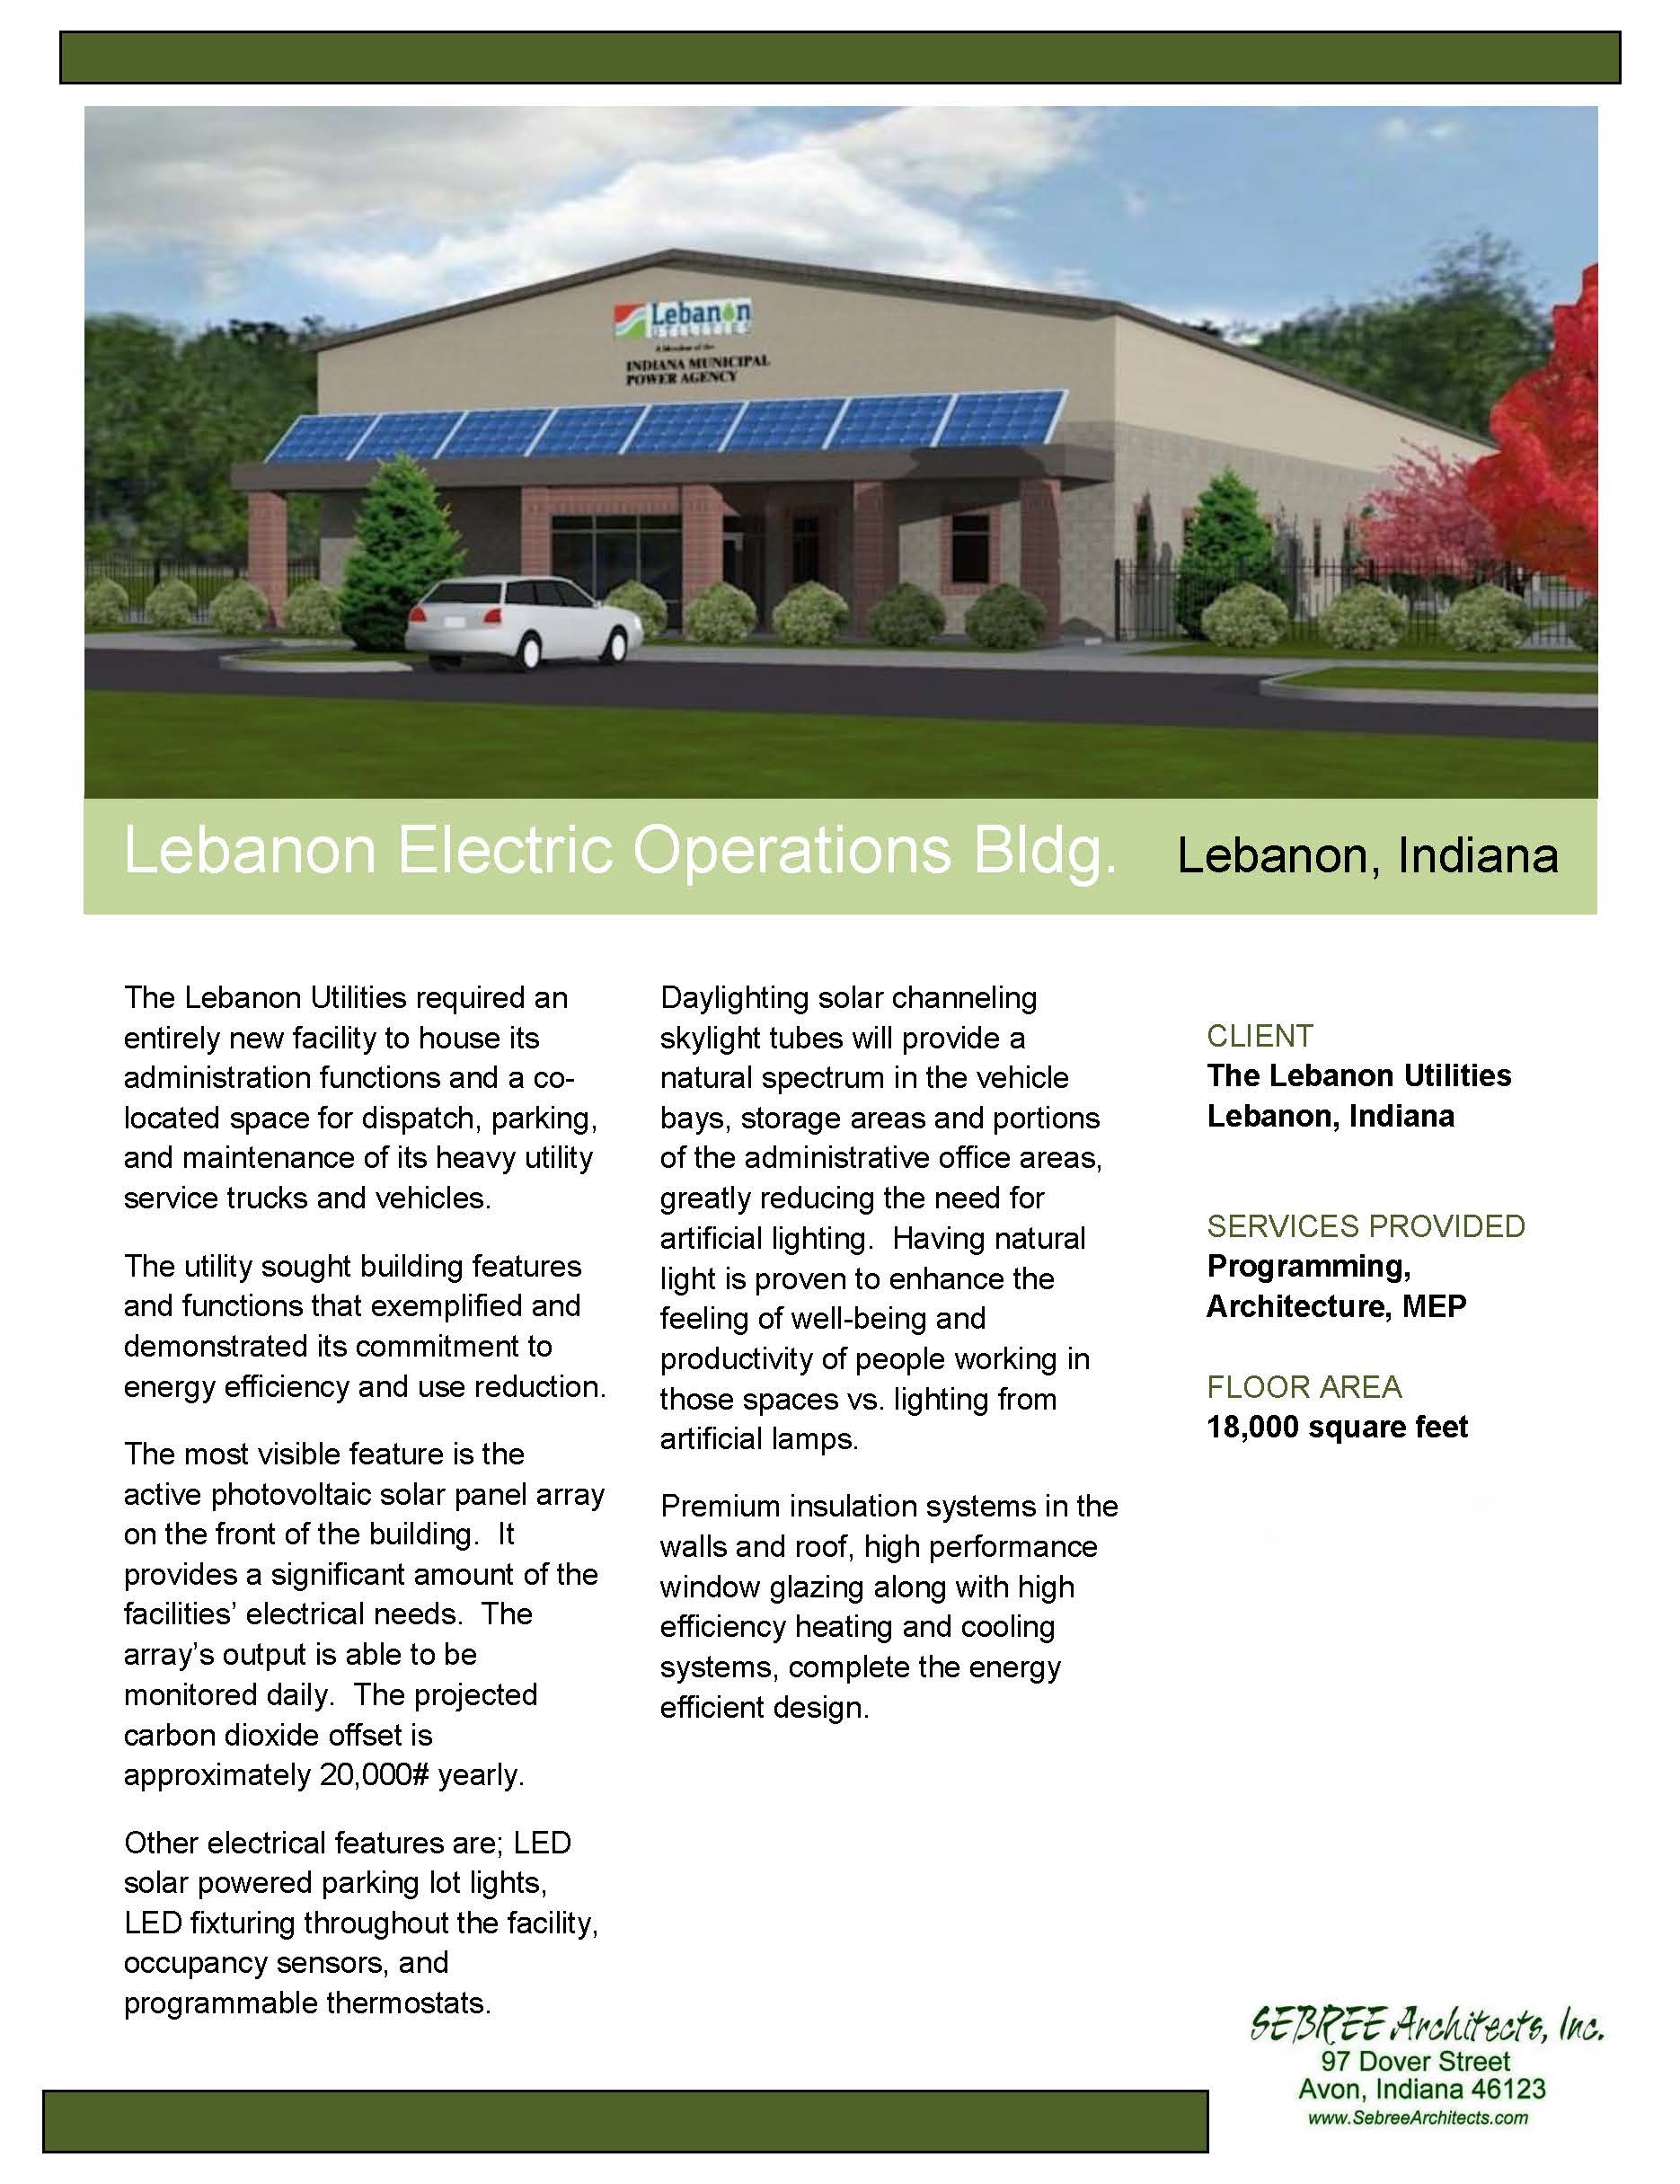 Electric Operations Building